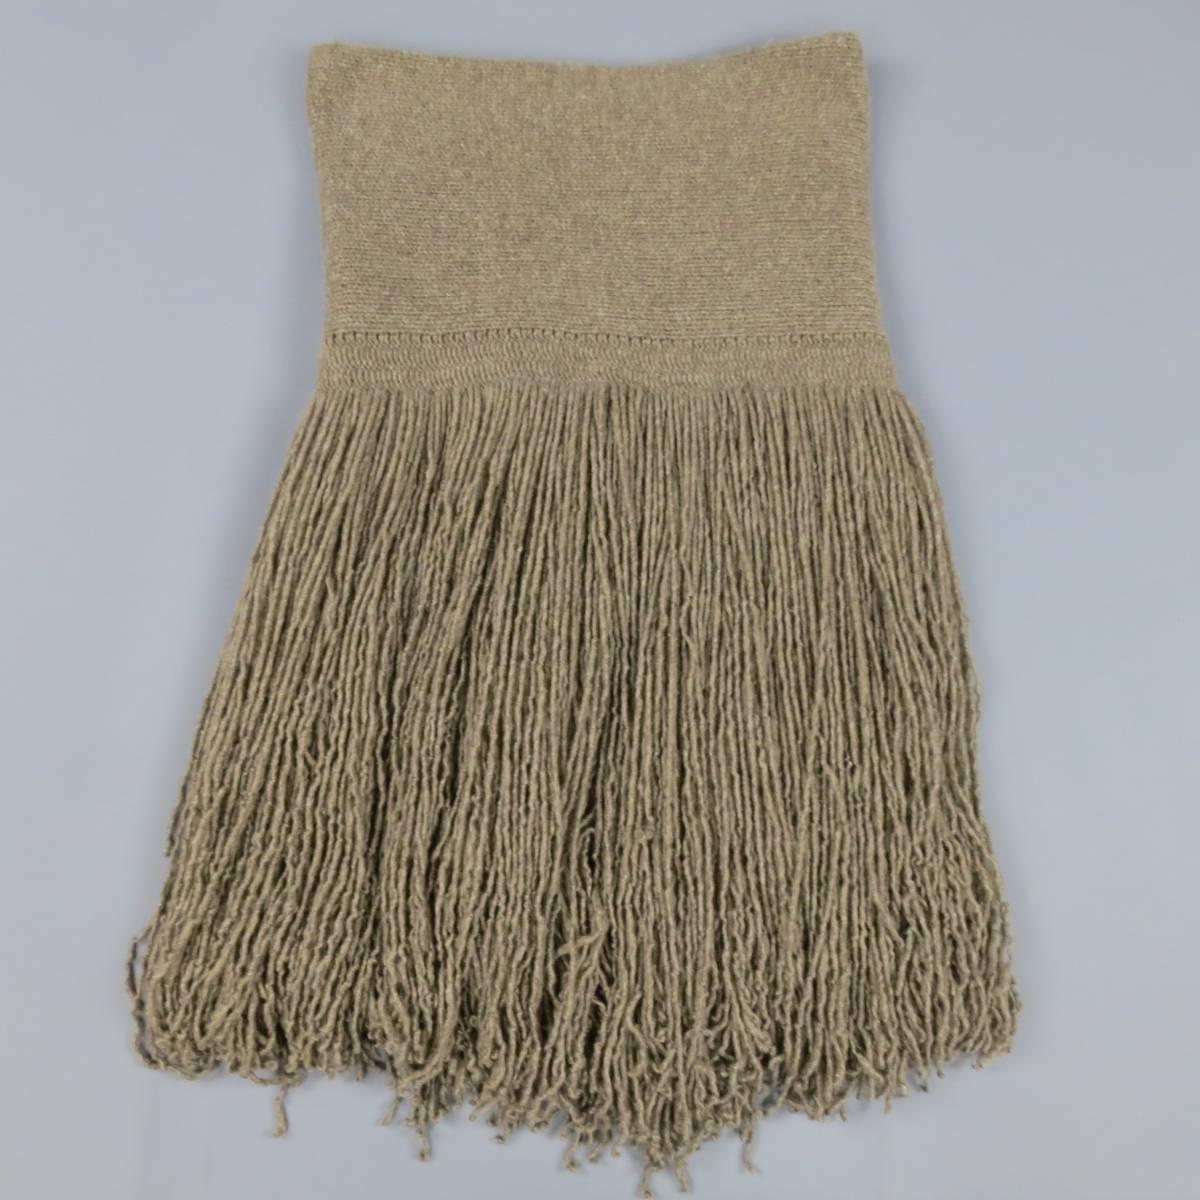 RALPH LAUREN Fall 2015 COLLECTION Taupe Cashmere Fringe Scarf Shawl 2